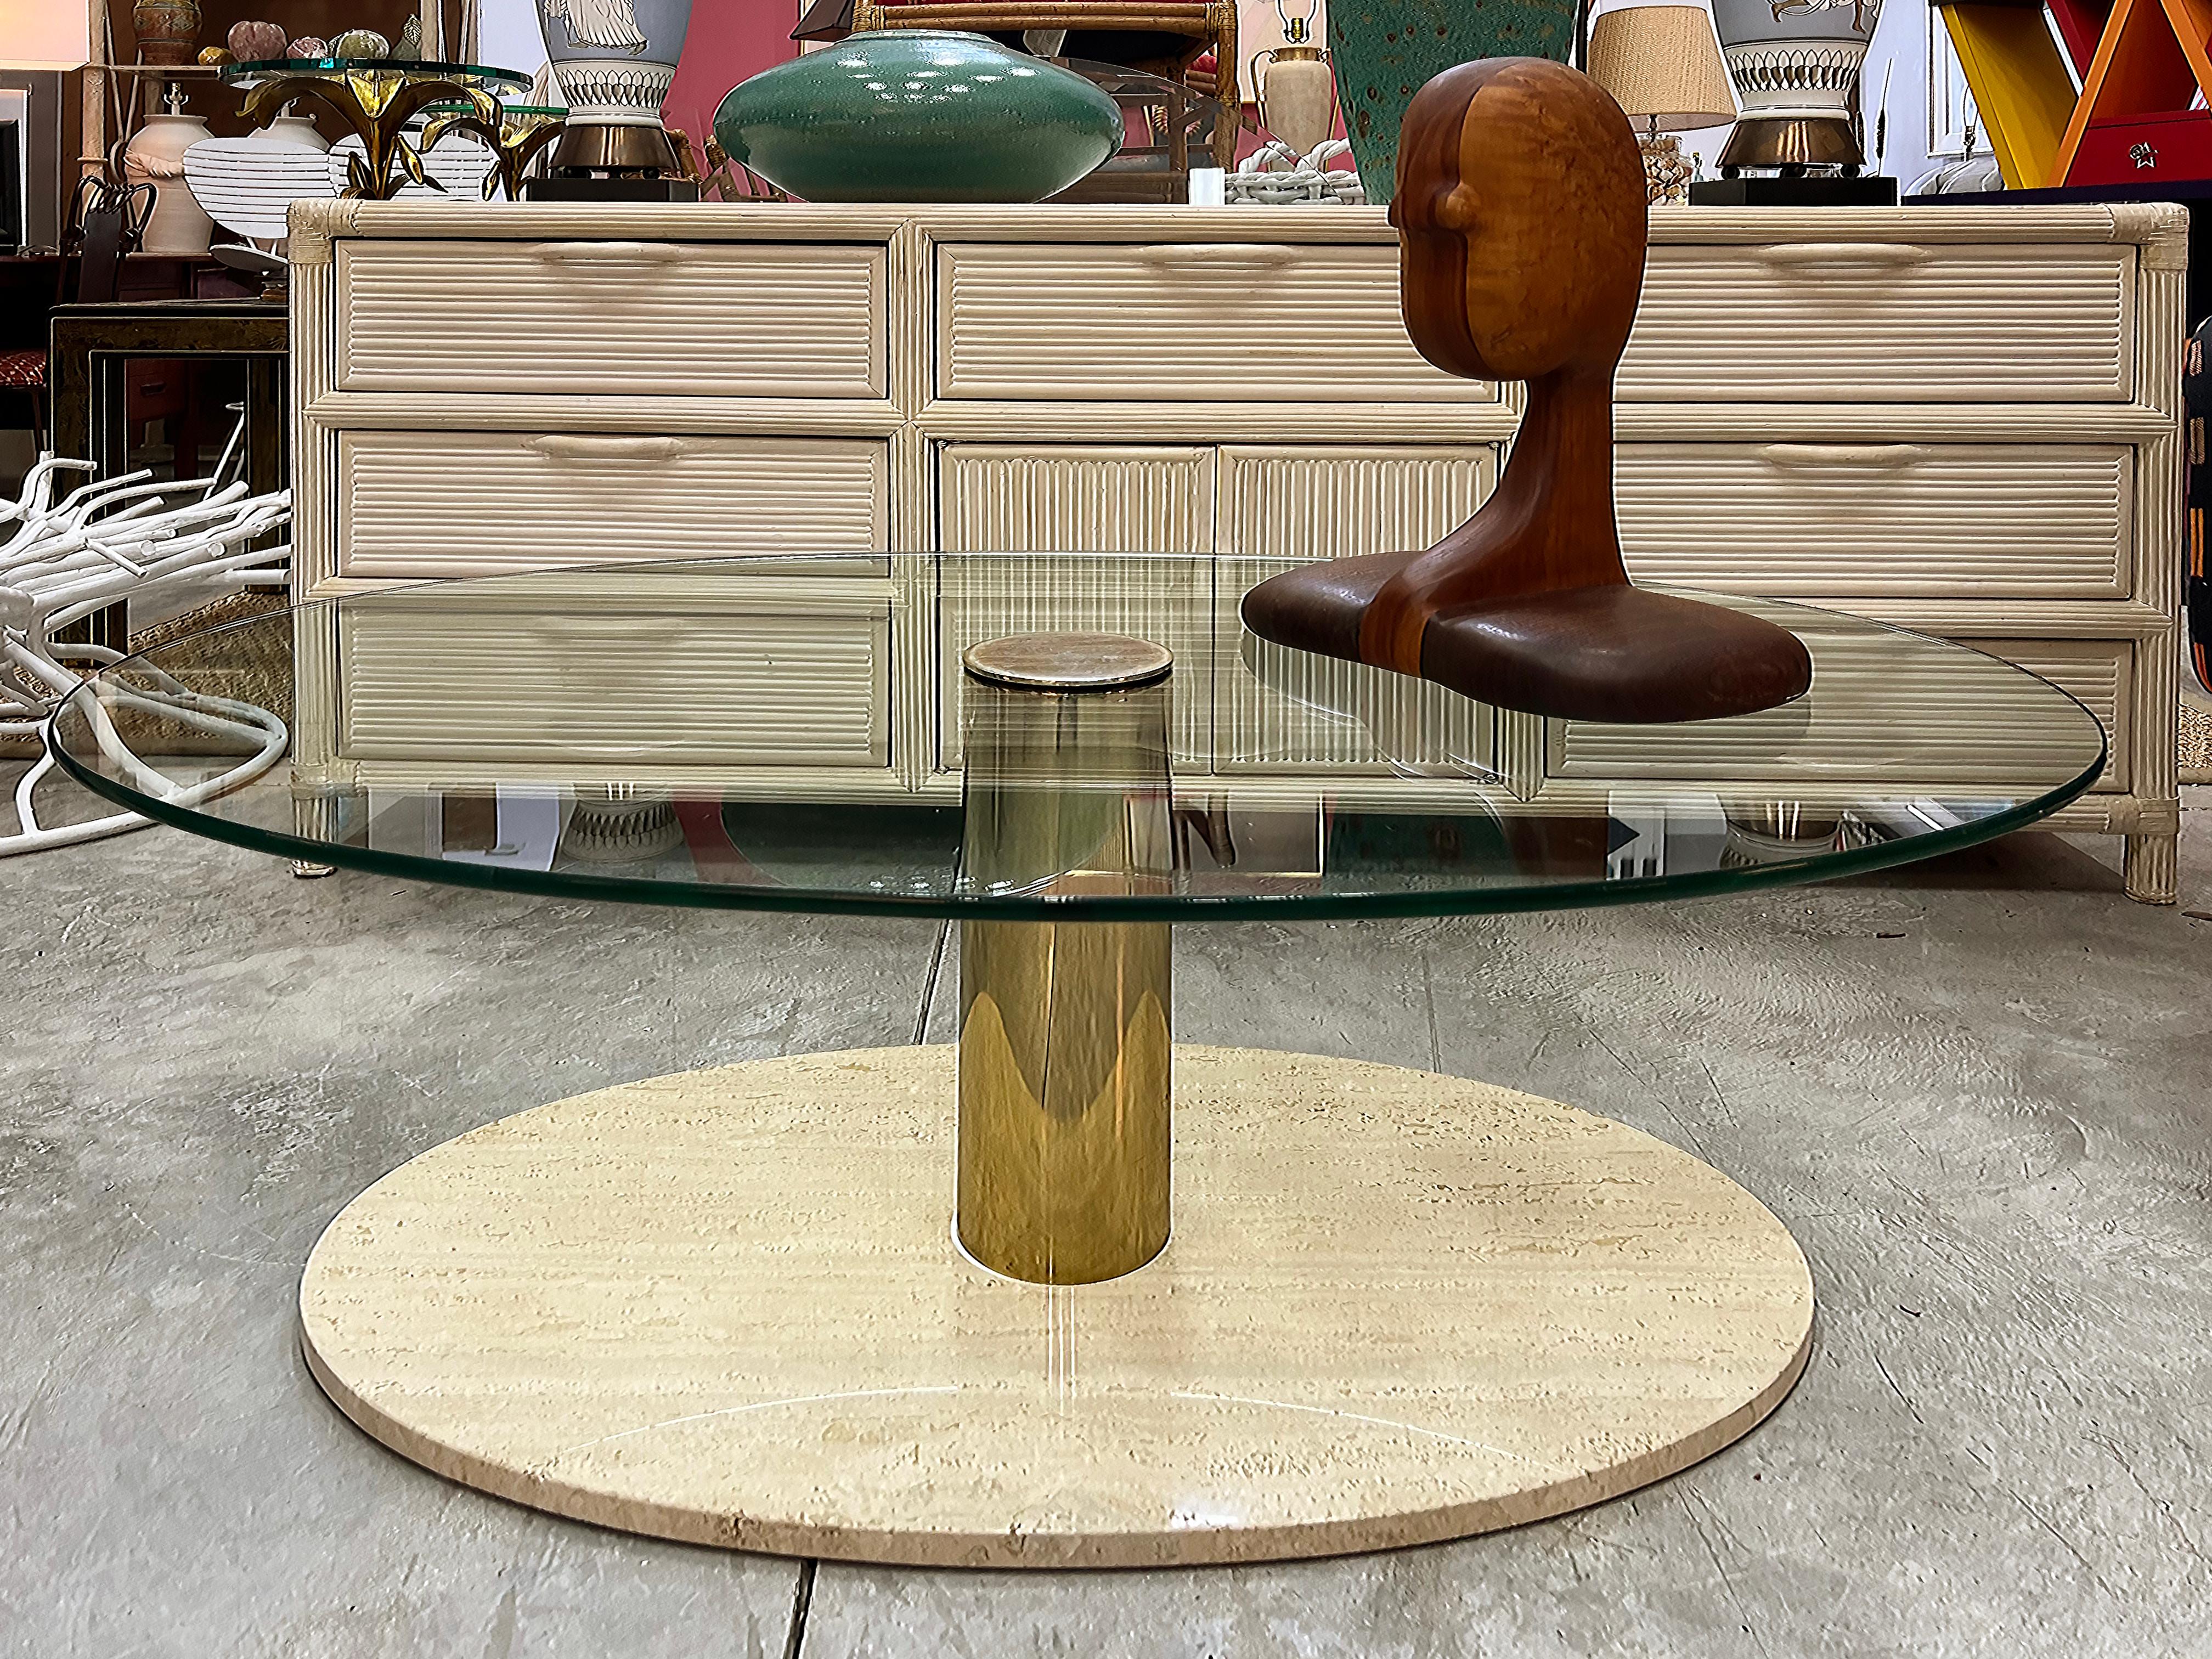 Pace Vintage Postmodern Travertine, Brass Coffee Table with Glass Top

Offered for sale is a vintage Postmodern 1980s Pace coffee table with a travertine base. The table has a substantial oval glass top that is supported by a single brass pedestal.